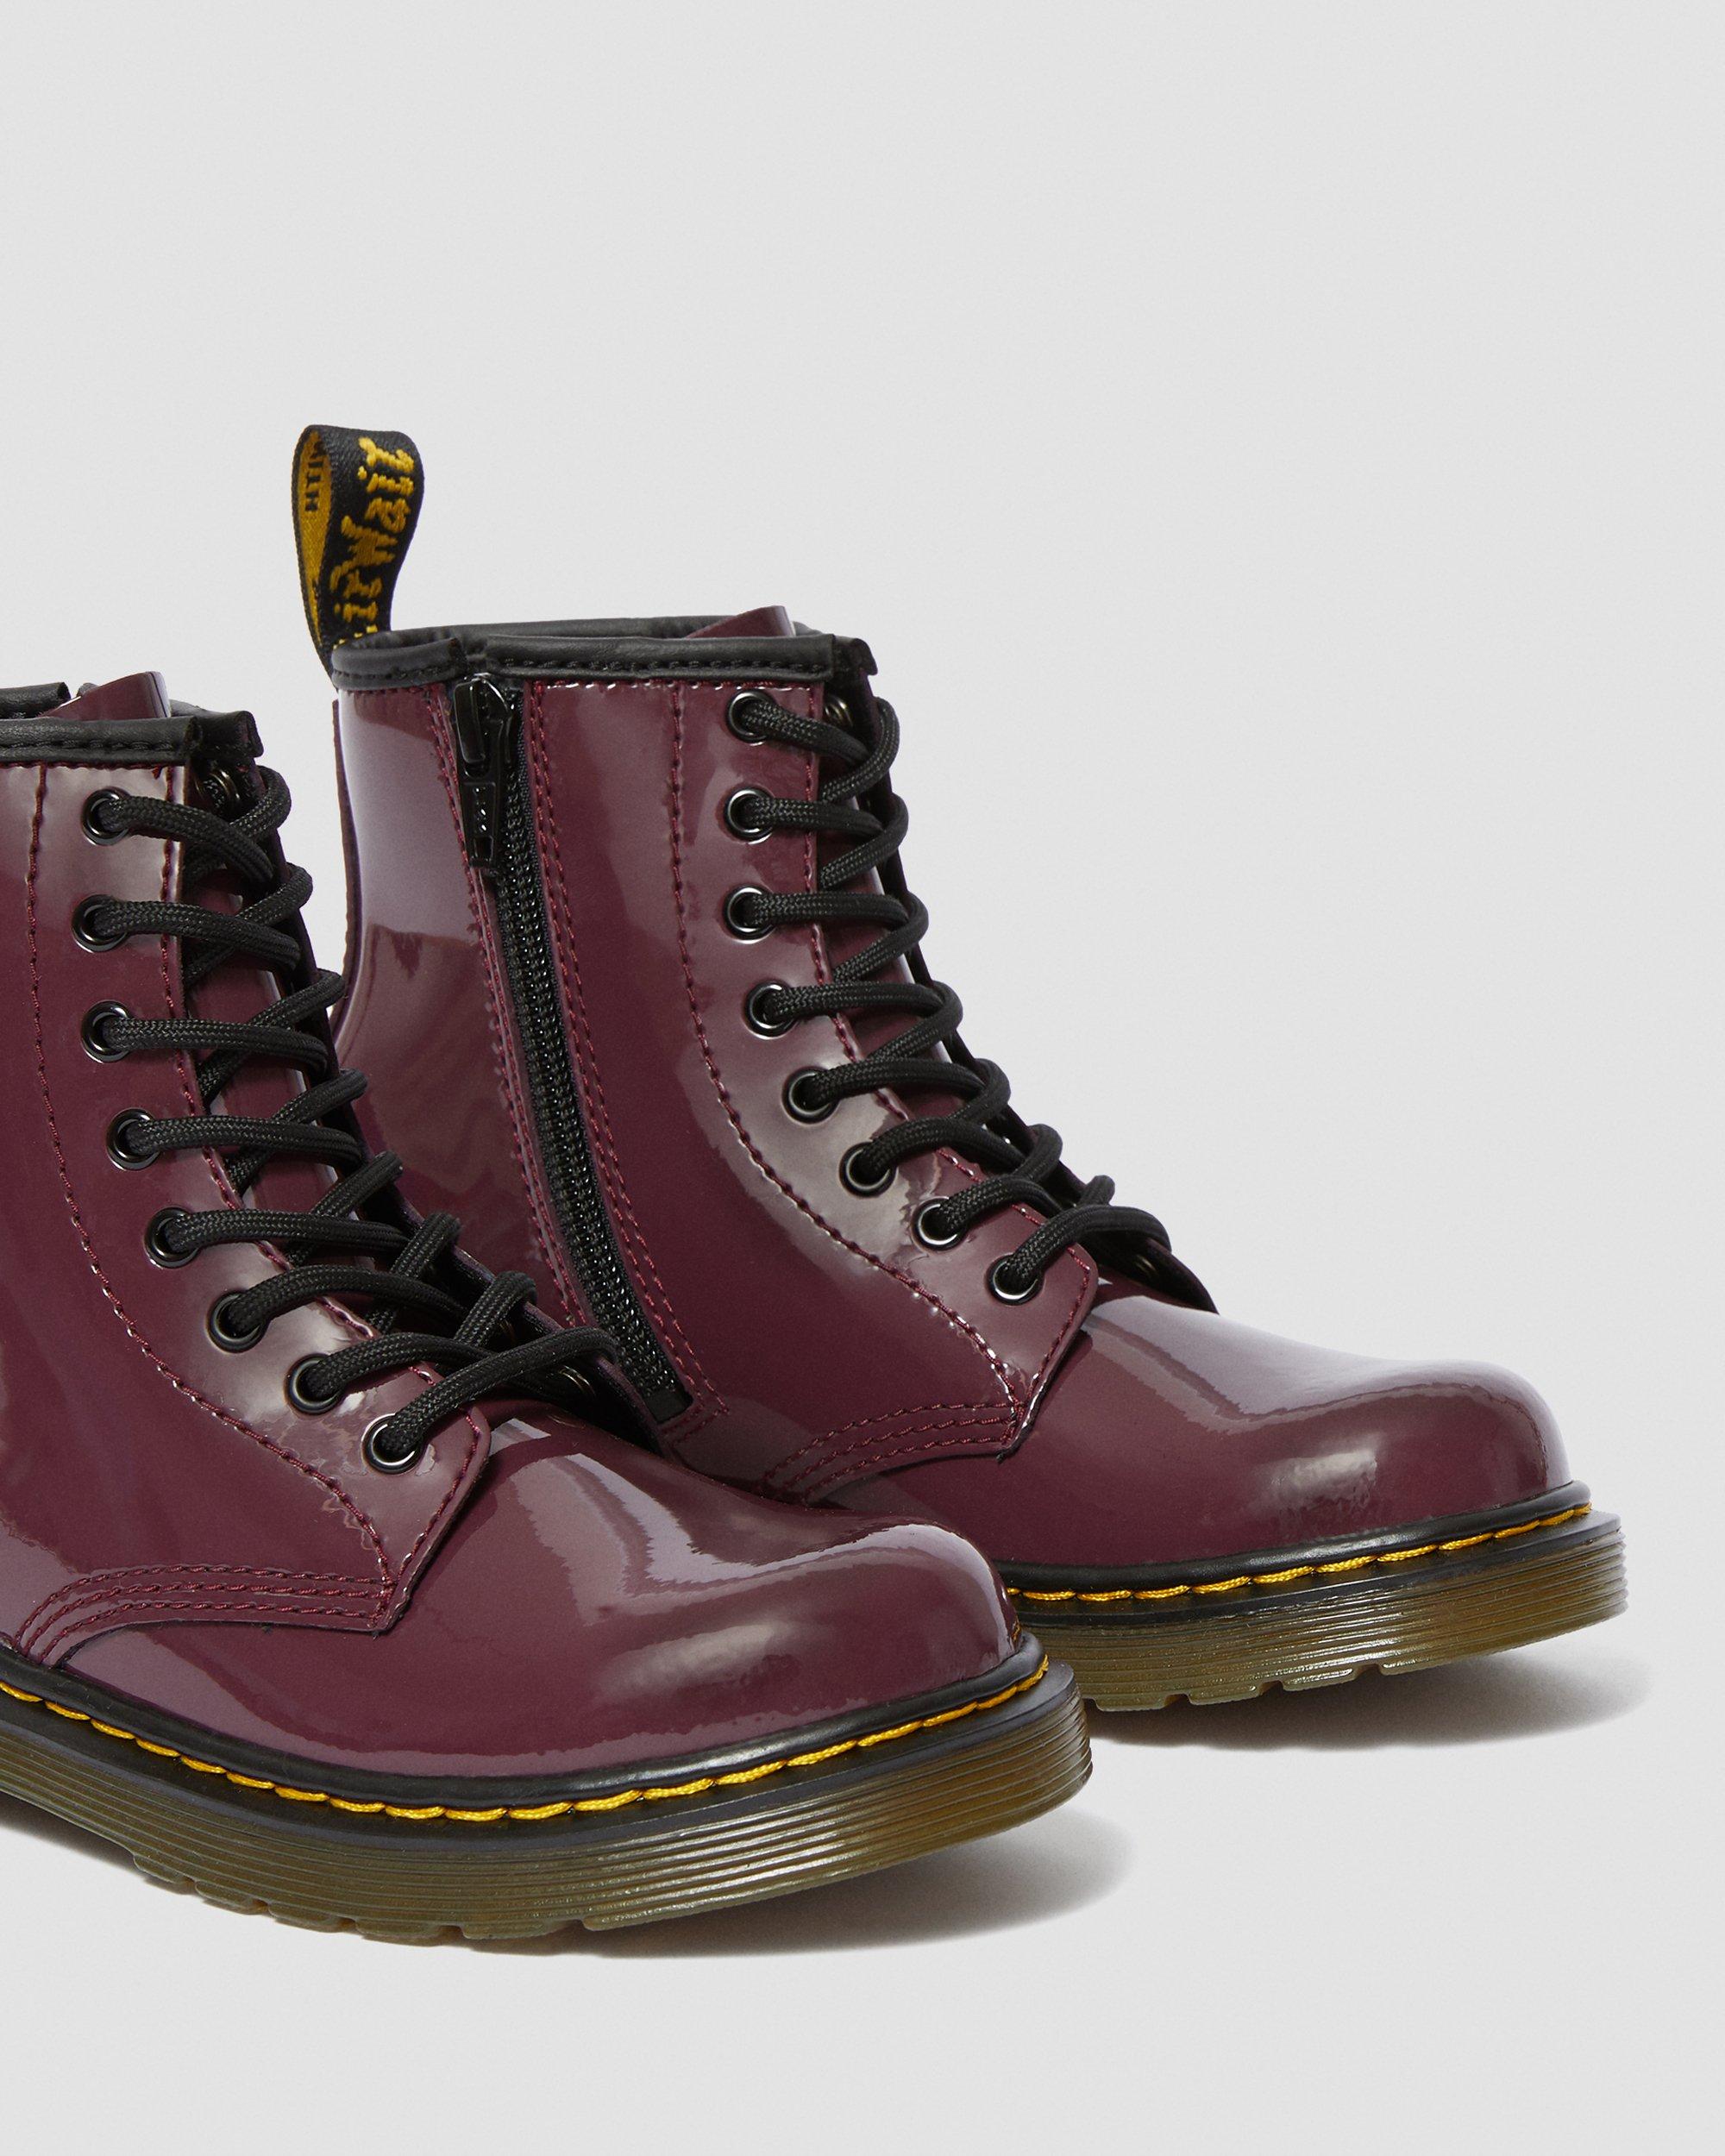 Junior 1460 Patent Leather Lace Up Boots in Plum